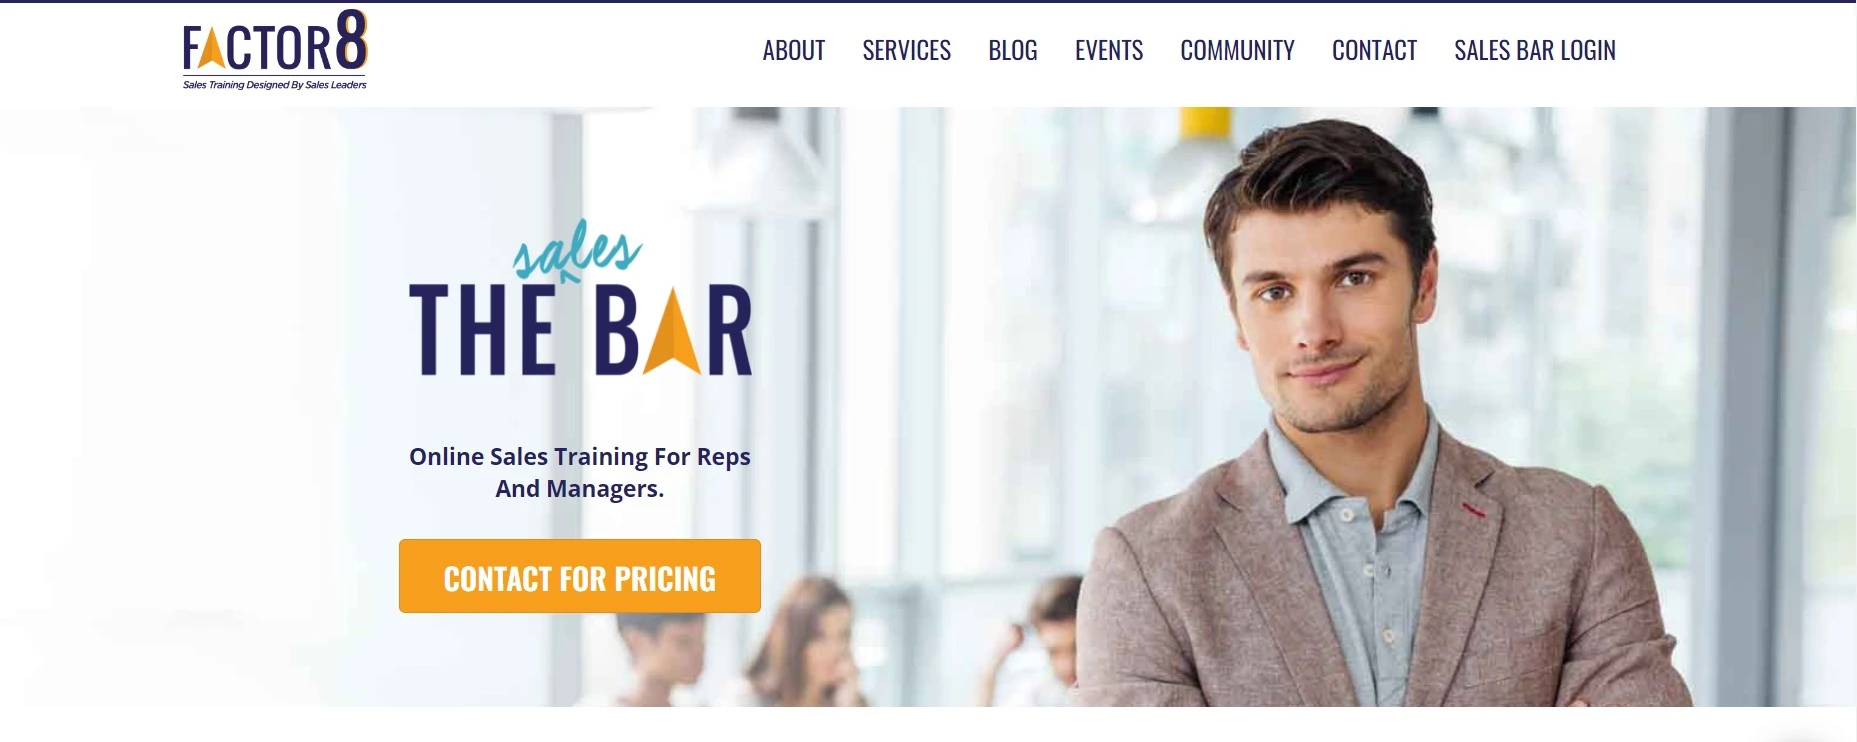 The sales bar sales onboarding tool